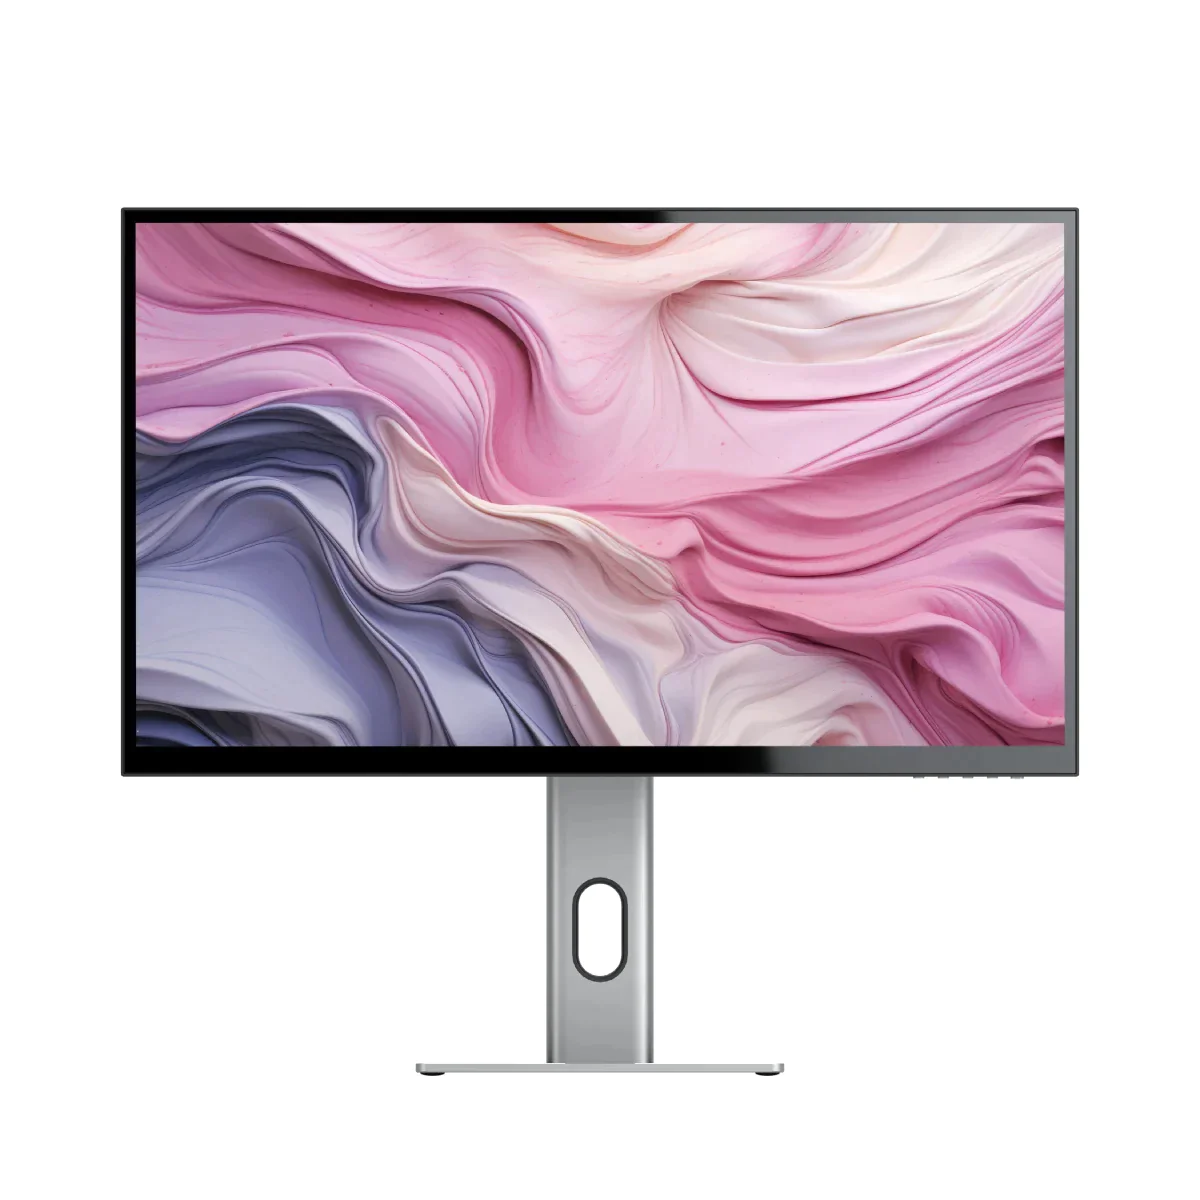 CLARITY 27" UHD 4K Monitor + Clarity Pro Touch 27" UHD 4K Monitor with 65W PD, Webcam and Touchscreen + Dual 4K Universal Docking Station HDMI Edition